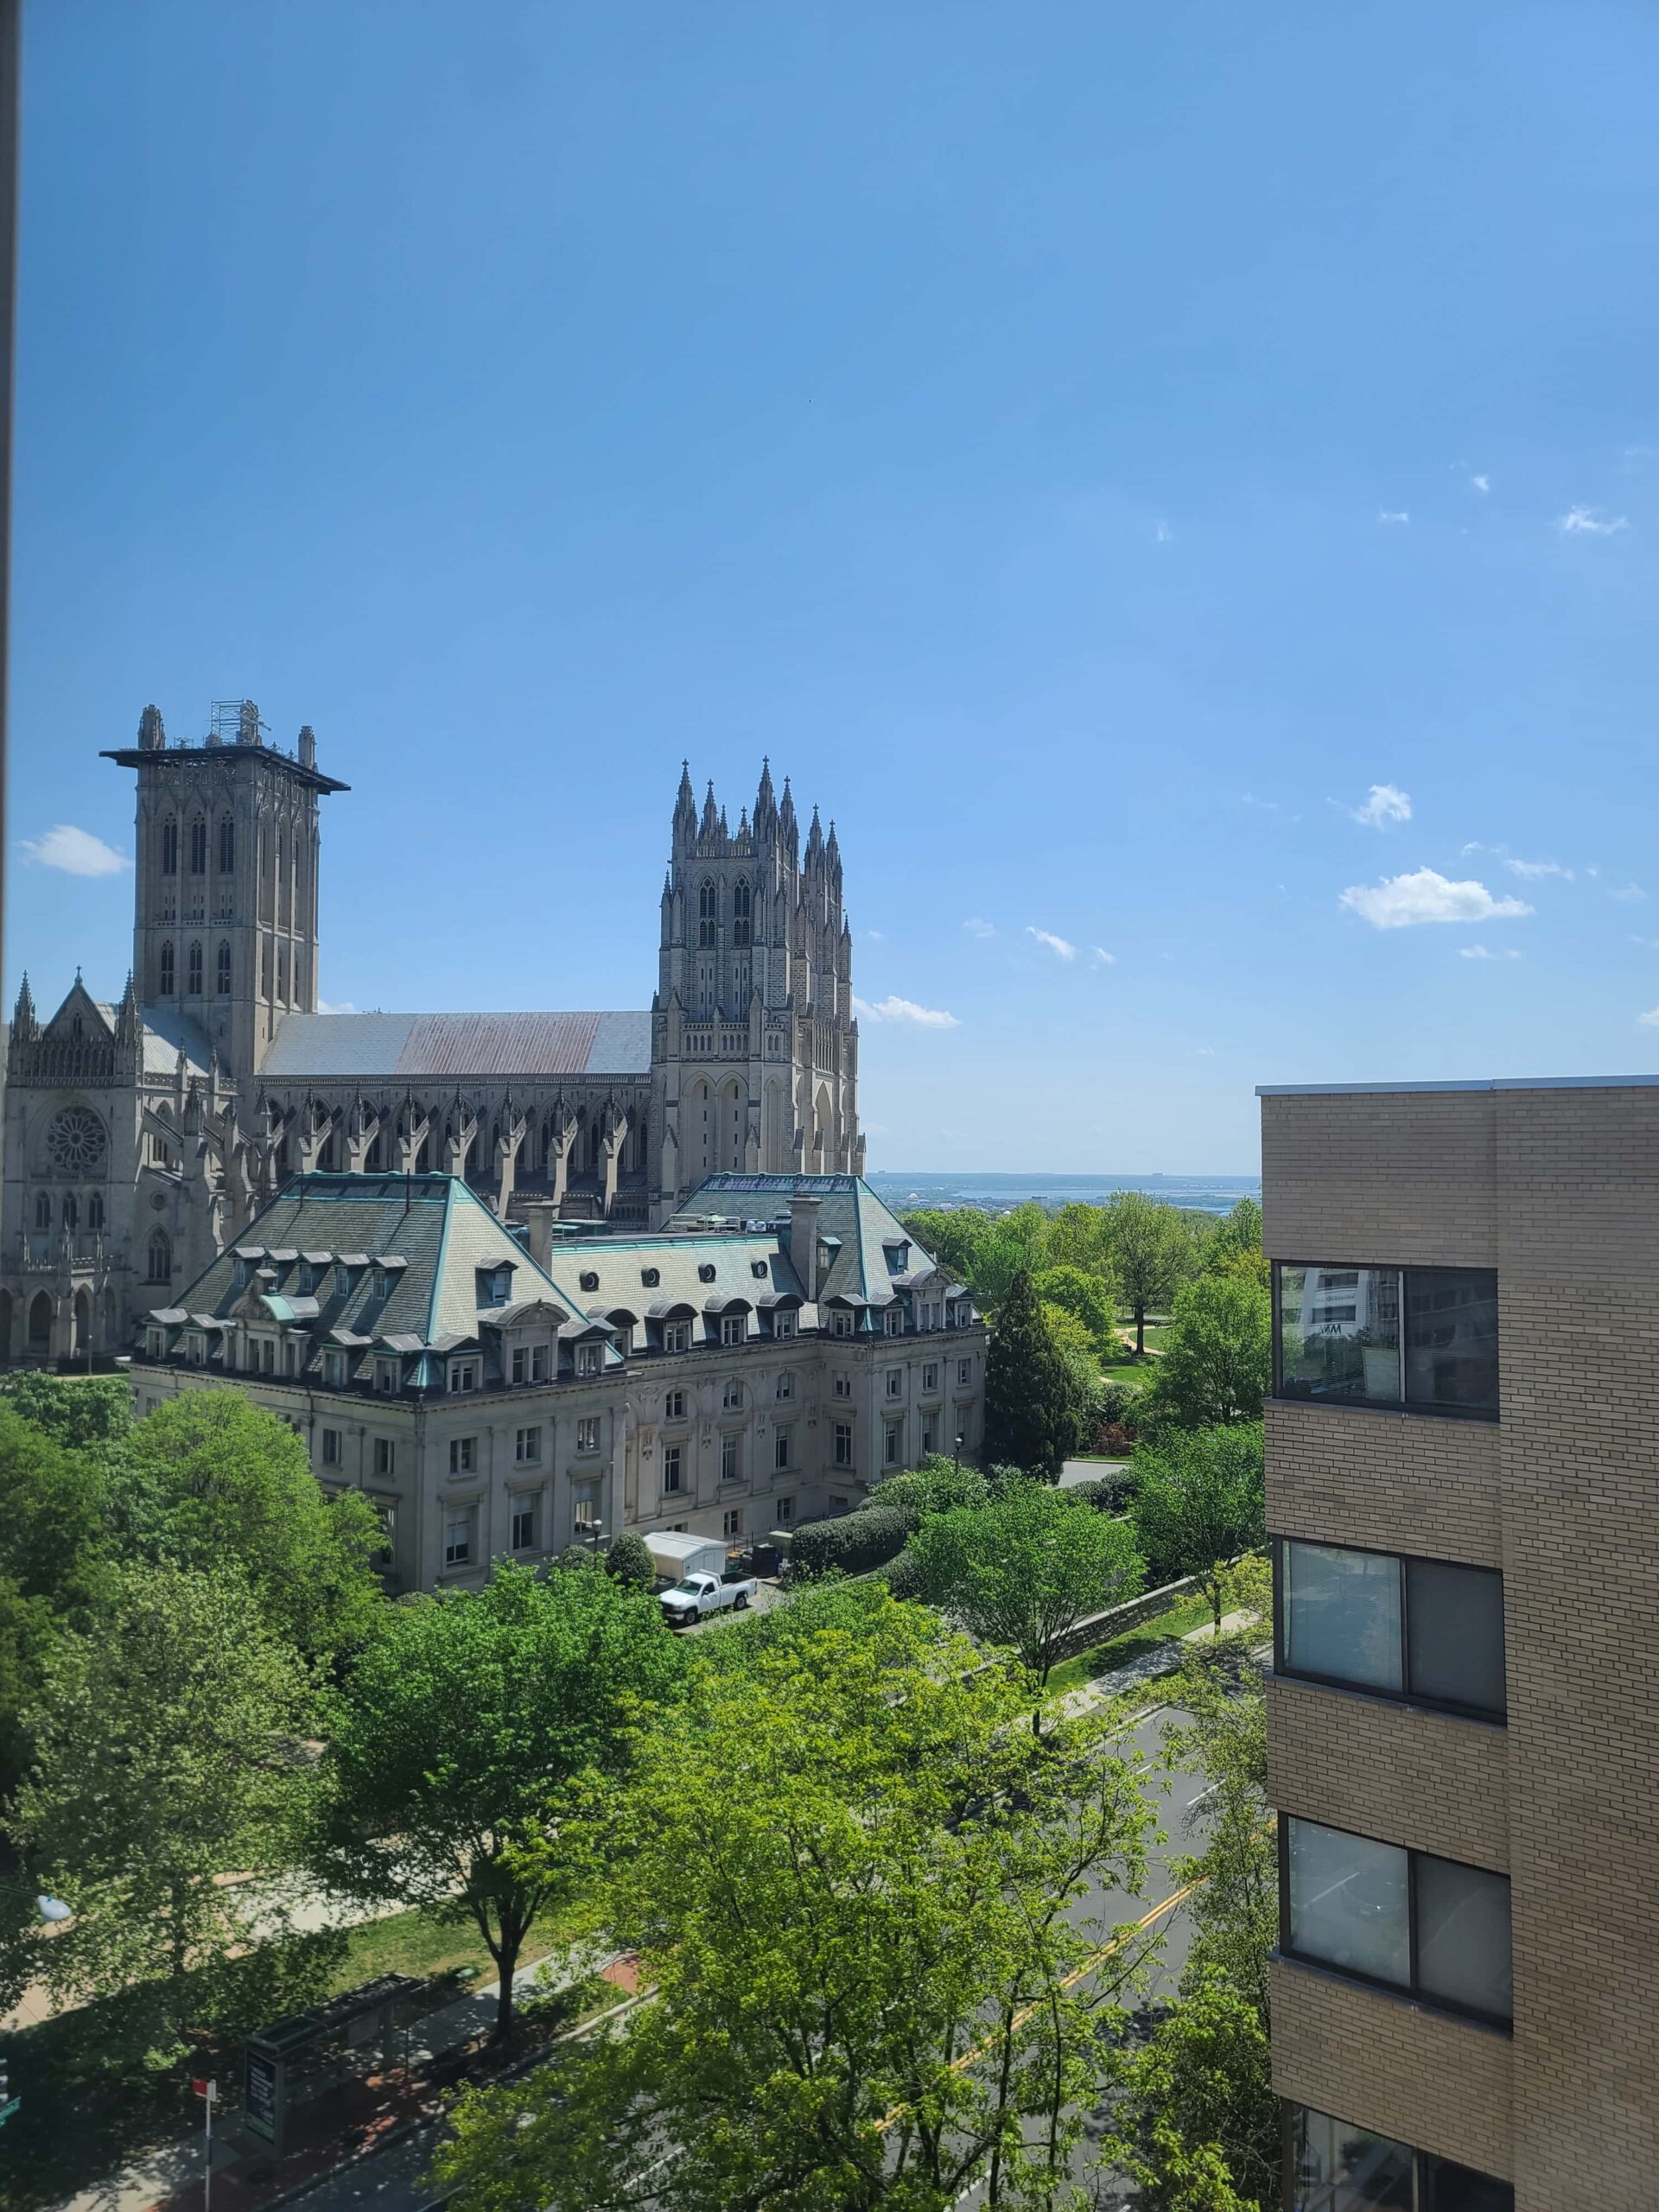 views of the cathedral from the building